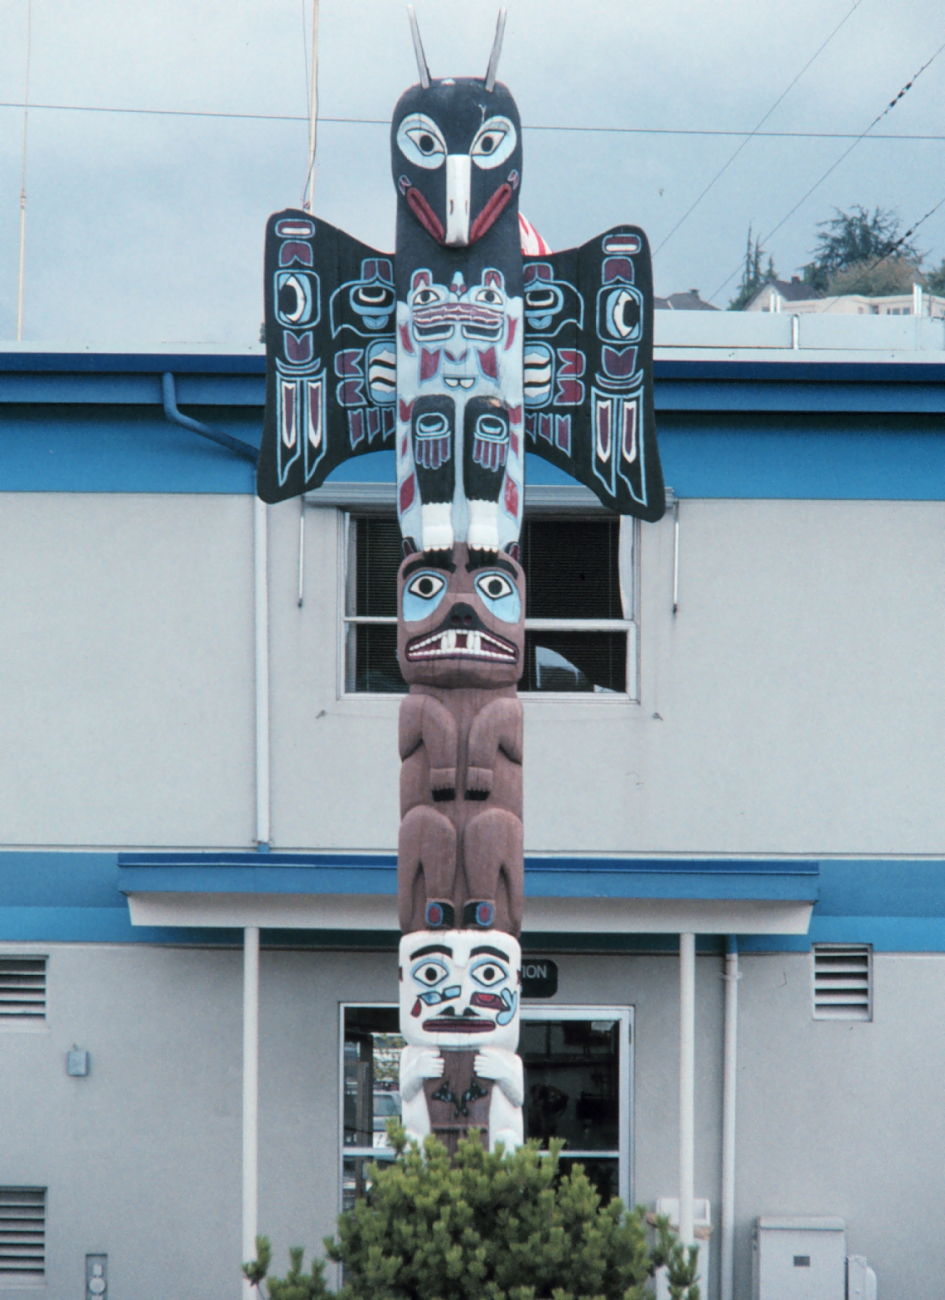 The totem pole at NOAA's Pacific Marine Center